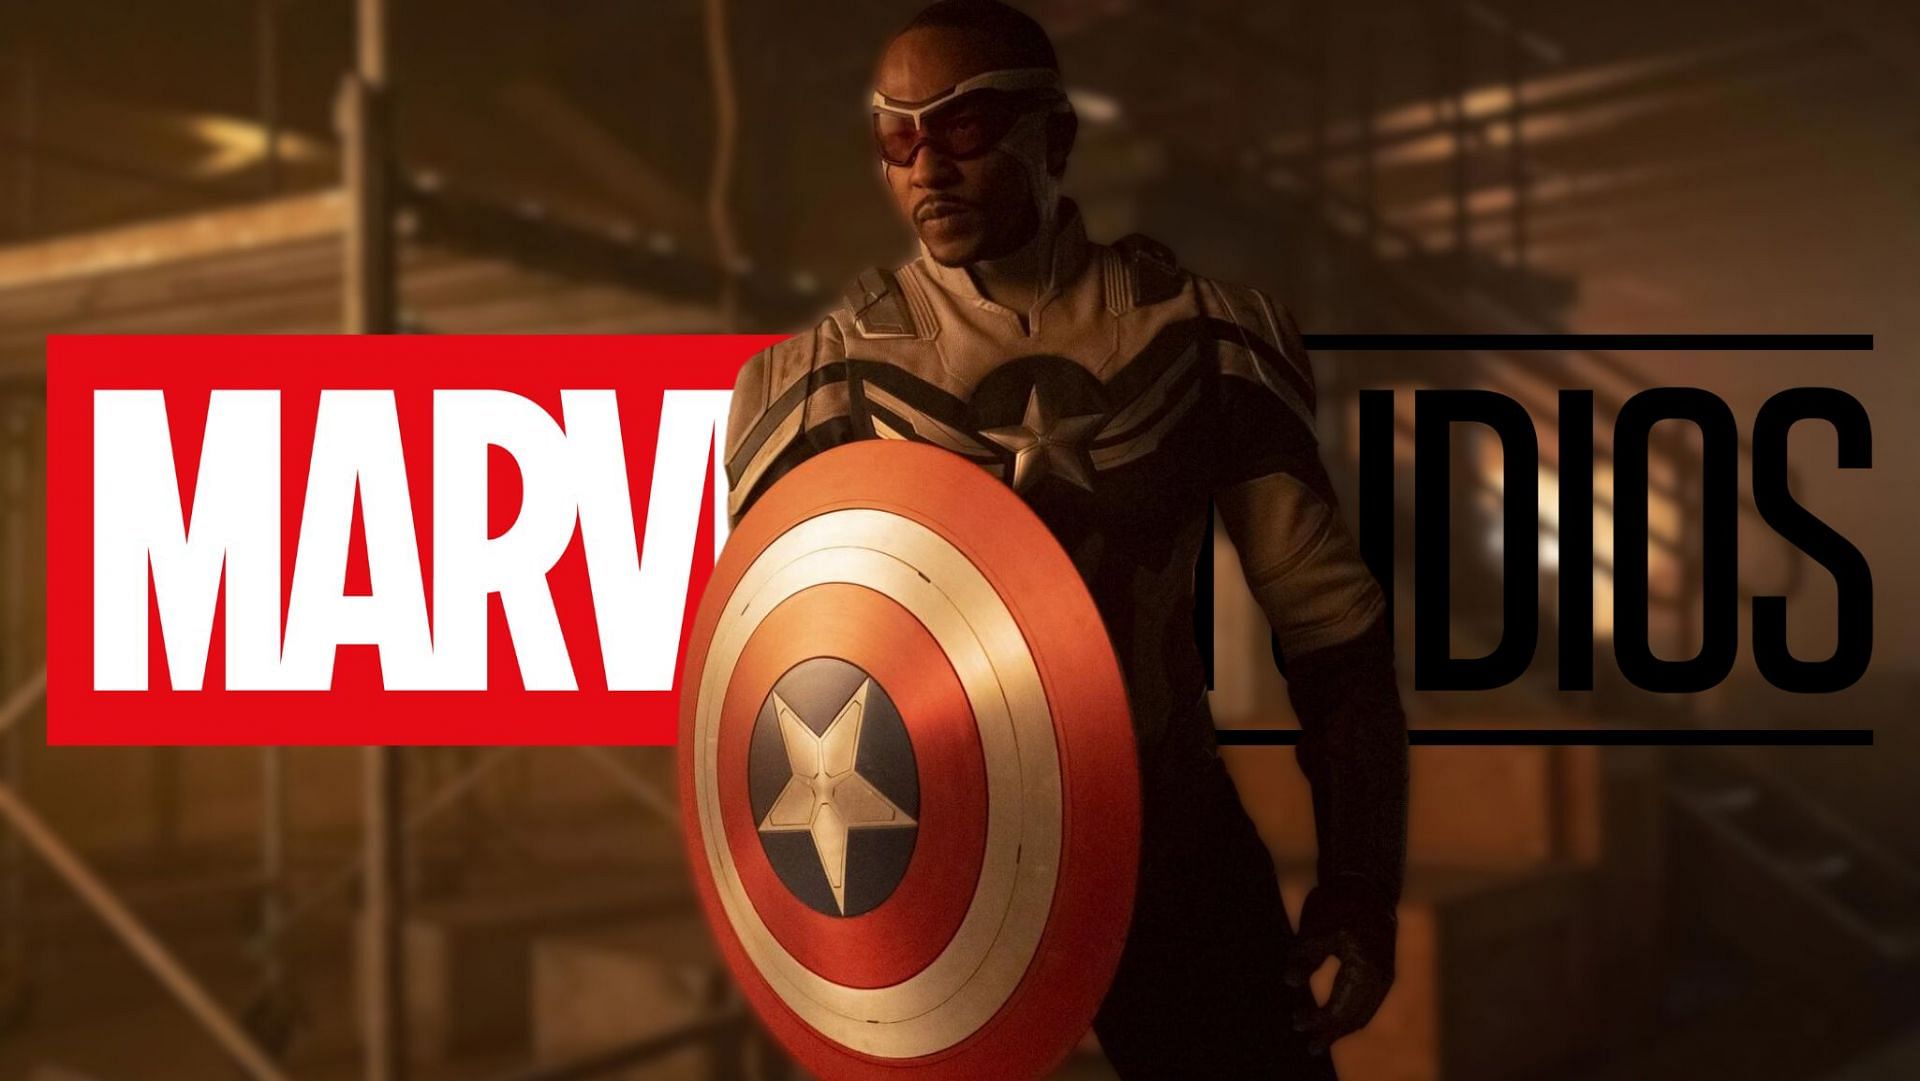 Anthony Mackie as Sam Wilson reveals his upgraded Captain America suit, ready to take on new challenges in Captain America 4 (Image via Sportskeeda)